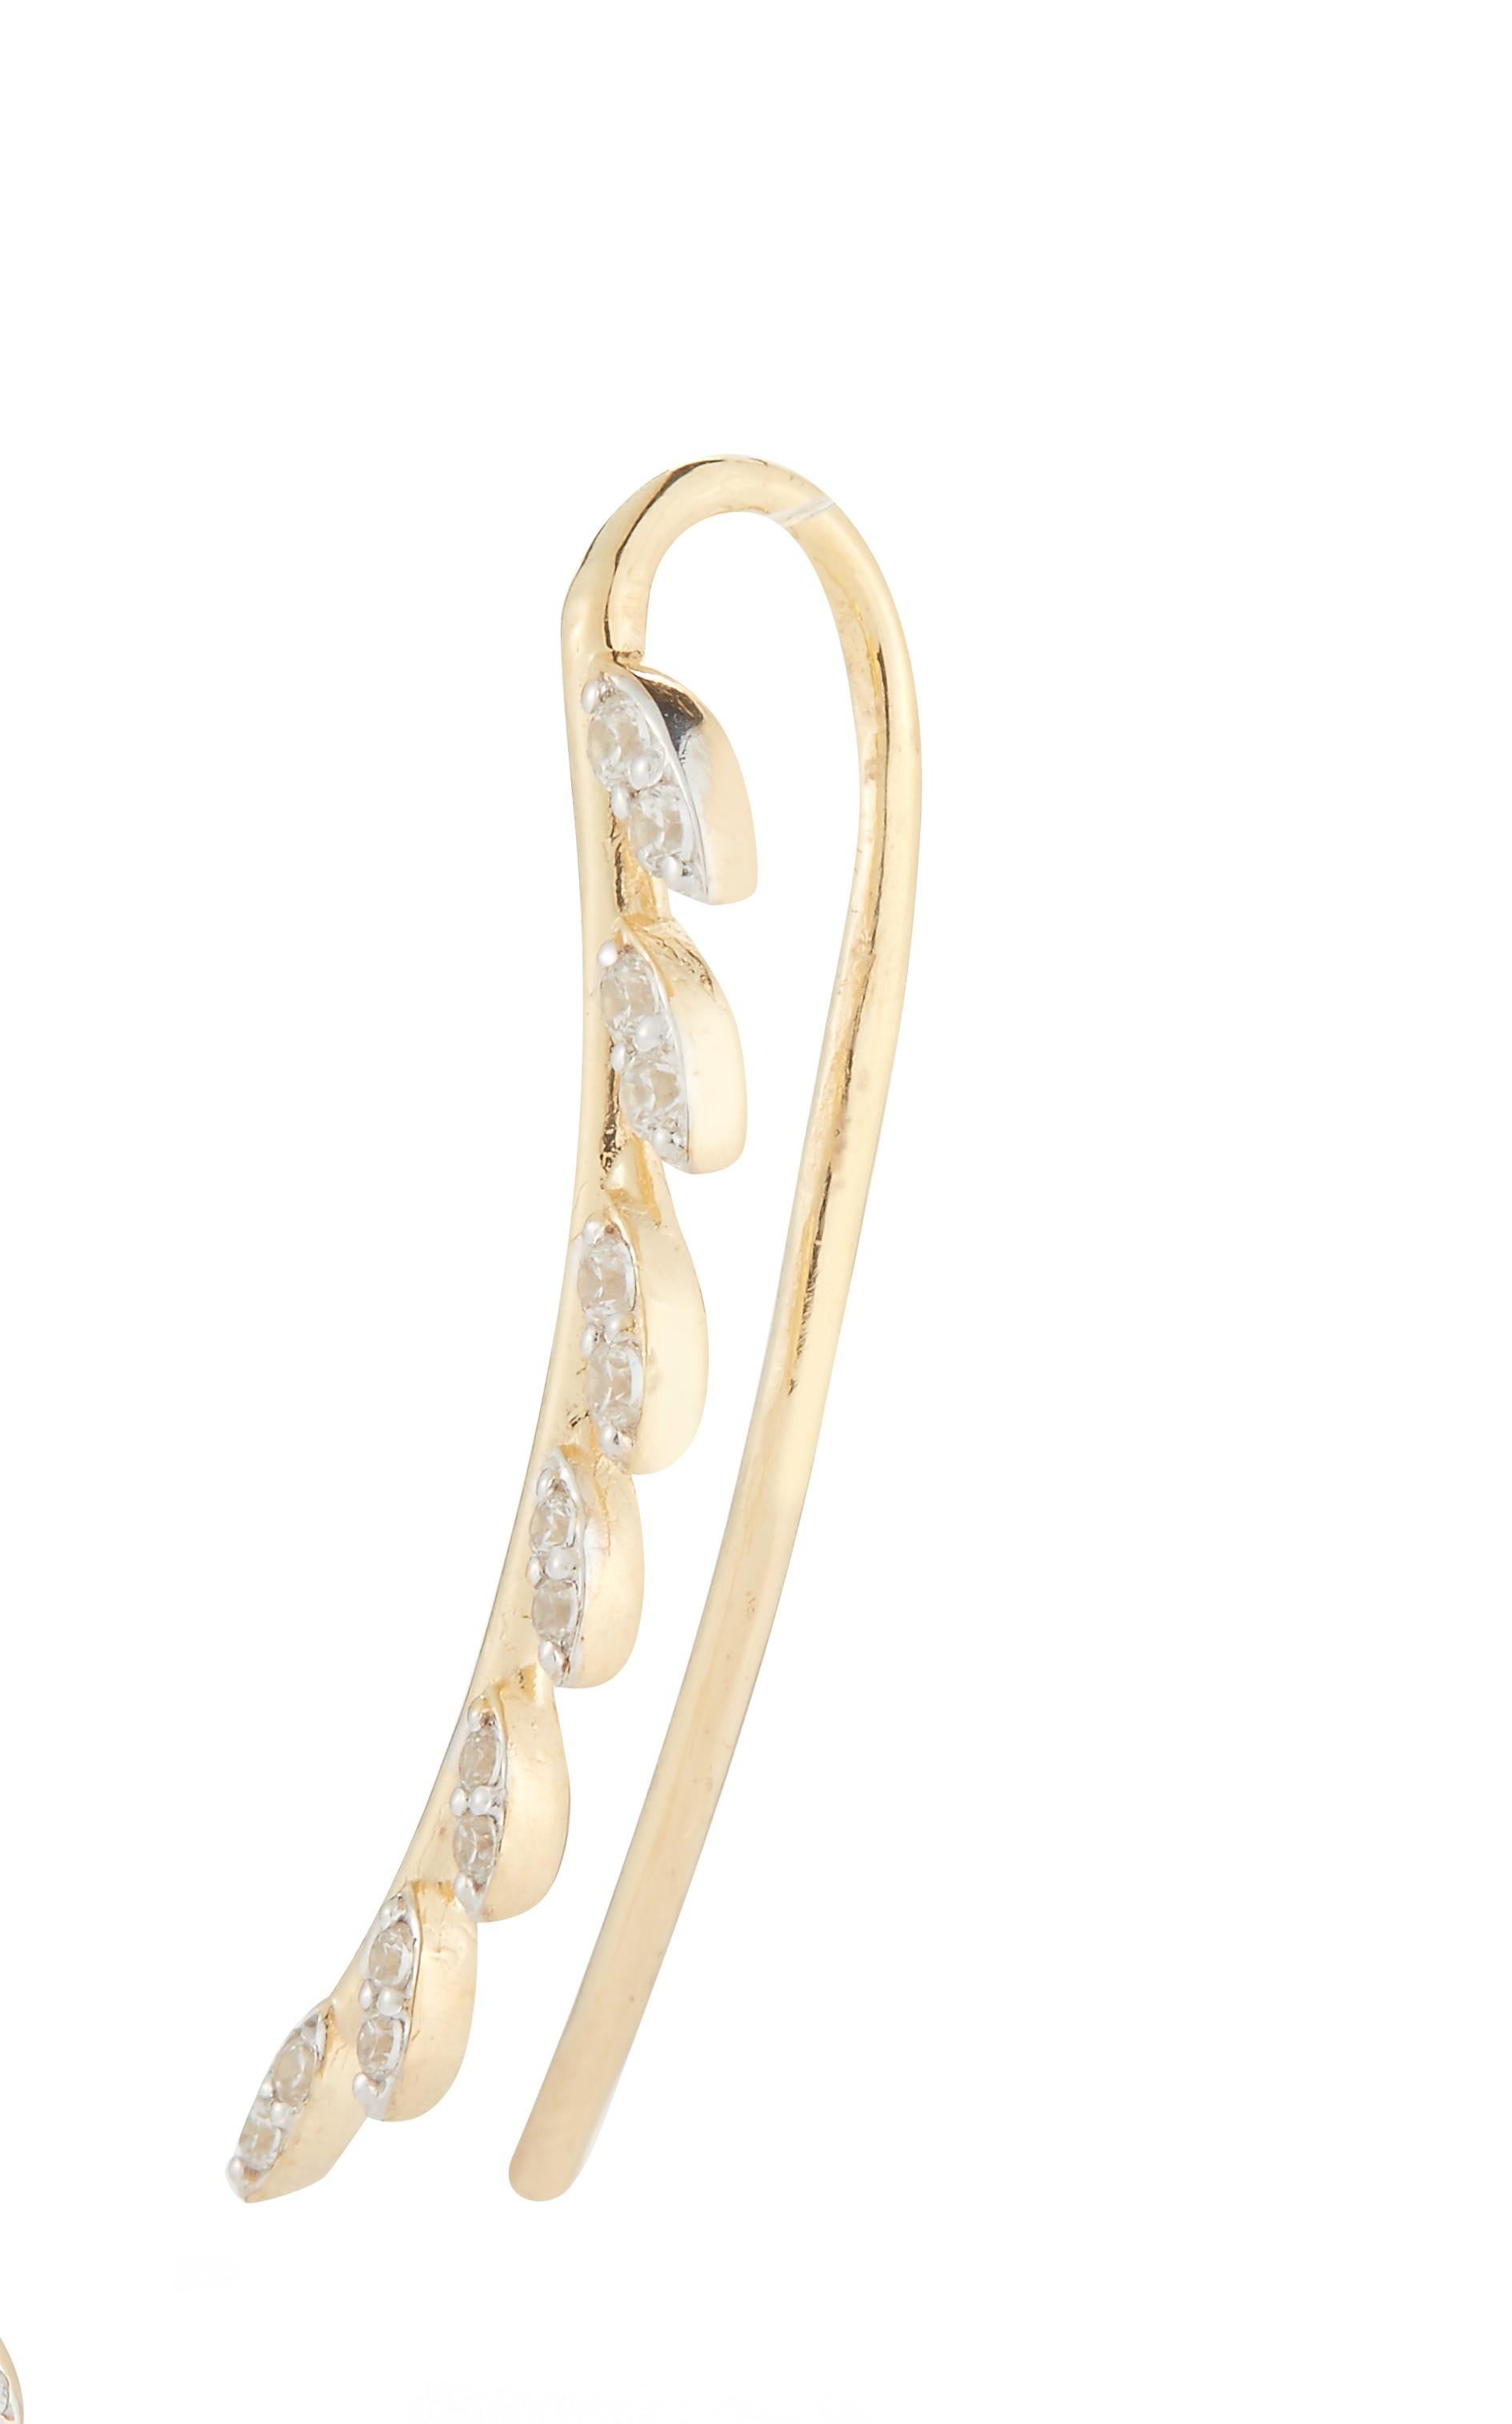 14 Karat Yellow Gold Hand-Crafted Polish-Finished Leaf Vine Climber Earrings, Enhanced with 0.15 Carats of Pave Set Diamond Leaves.

